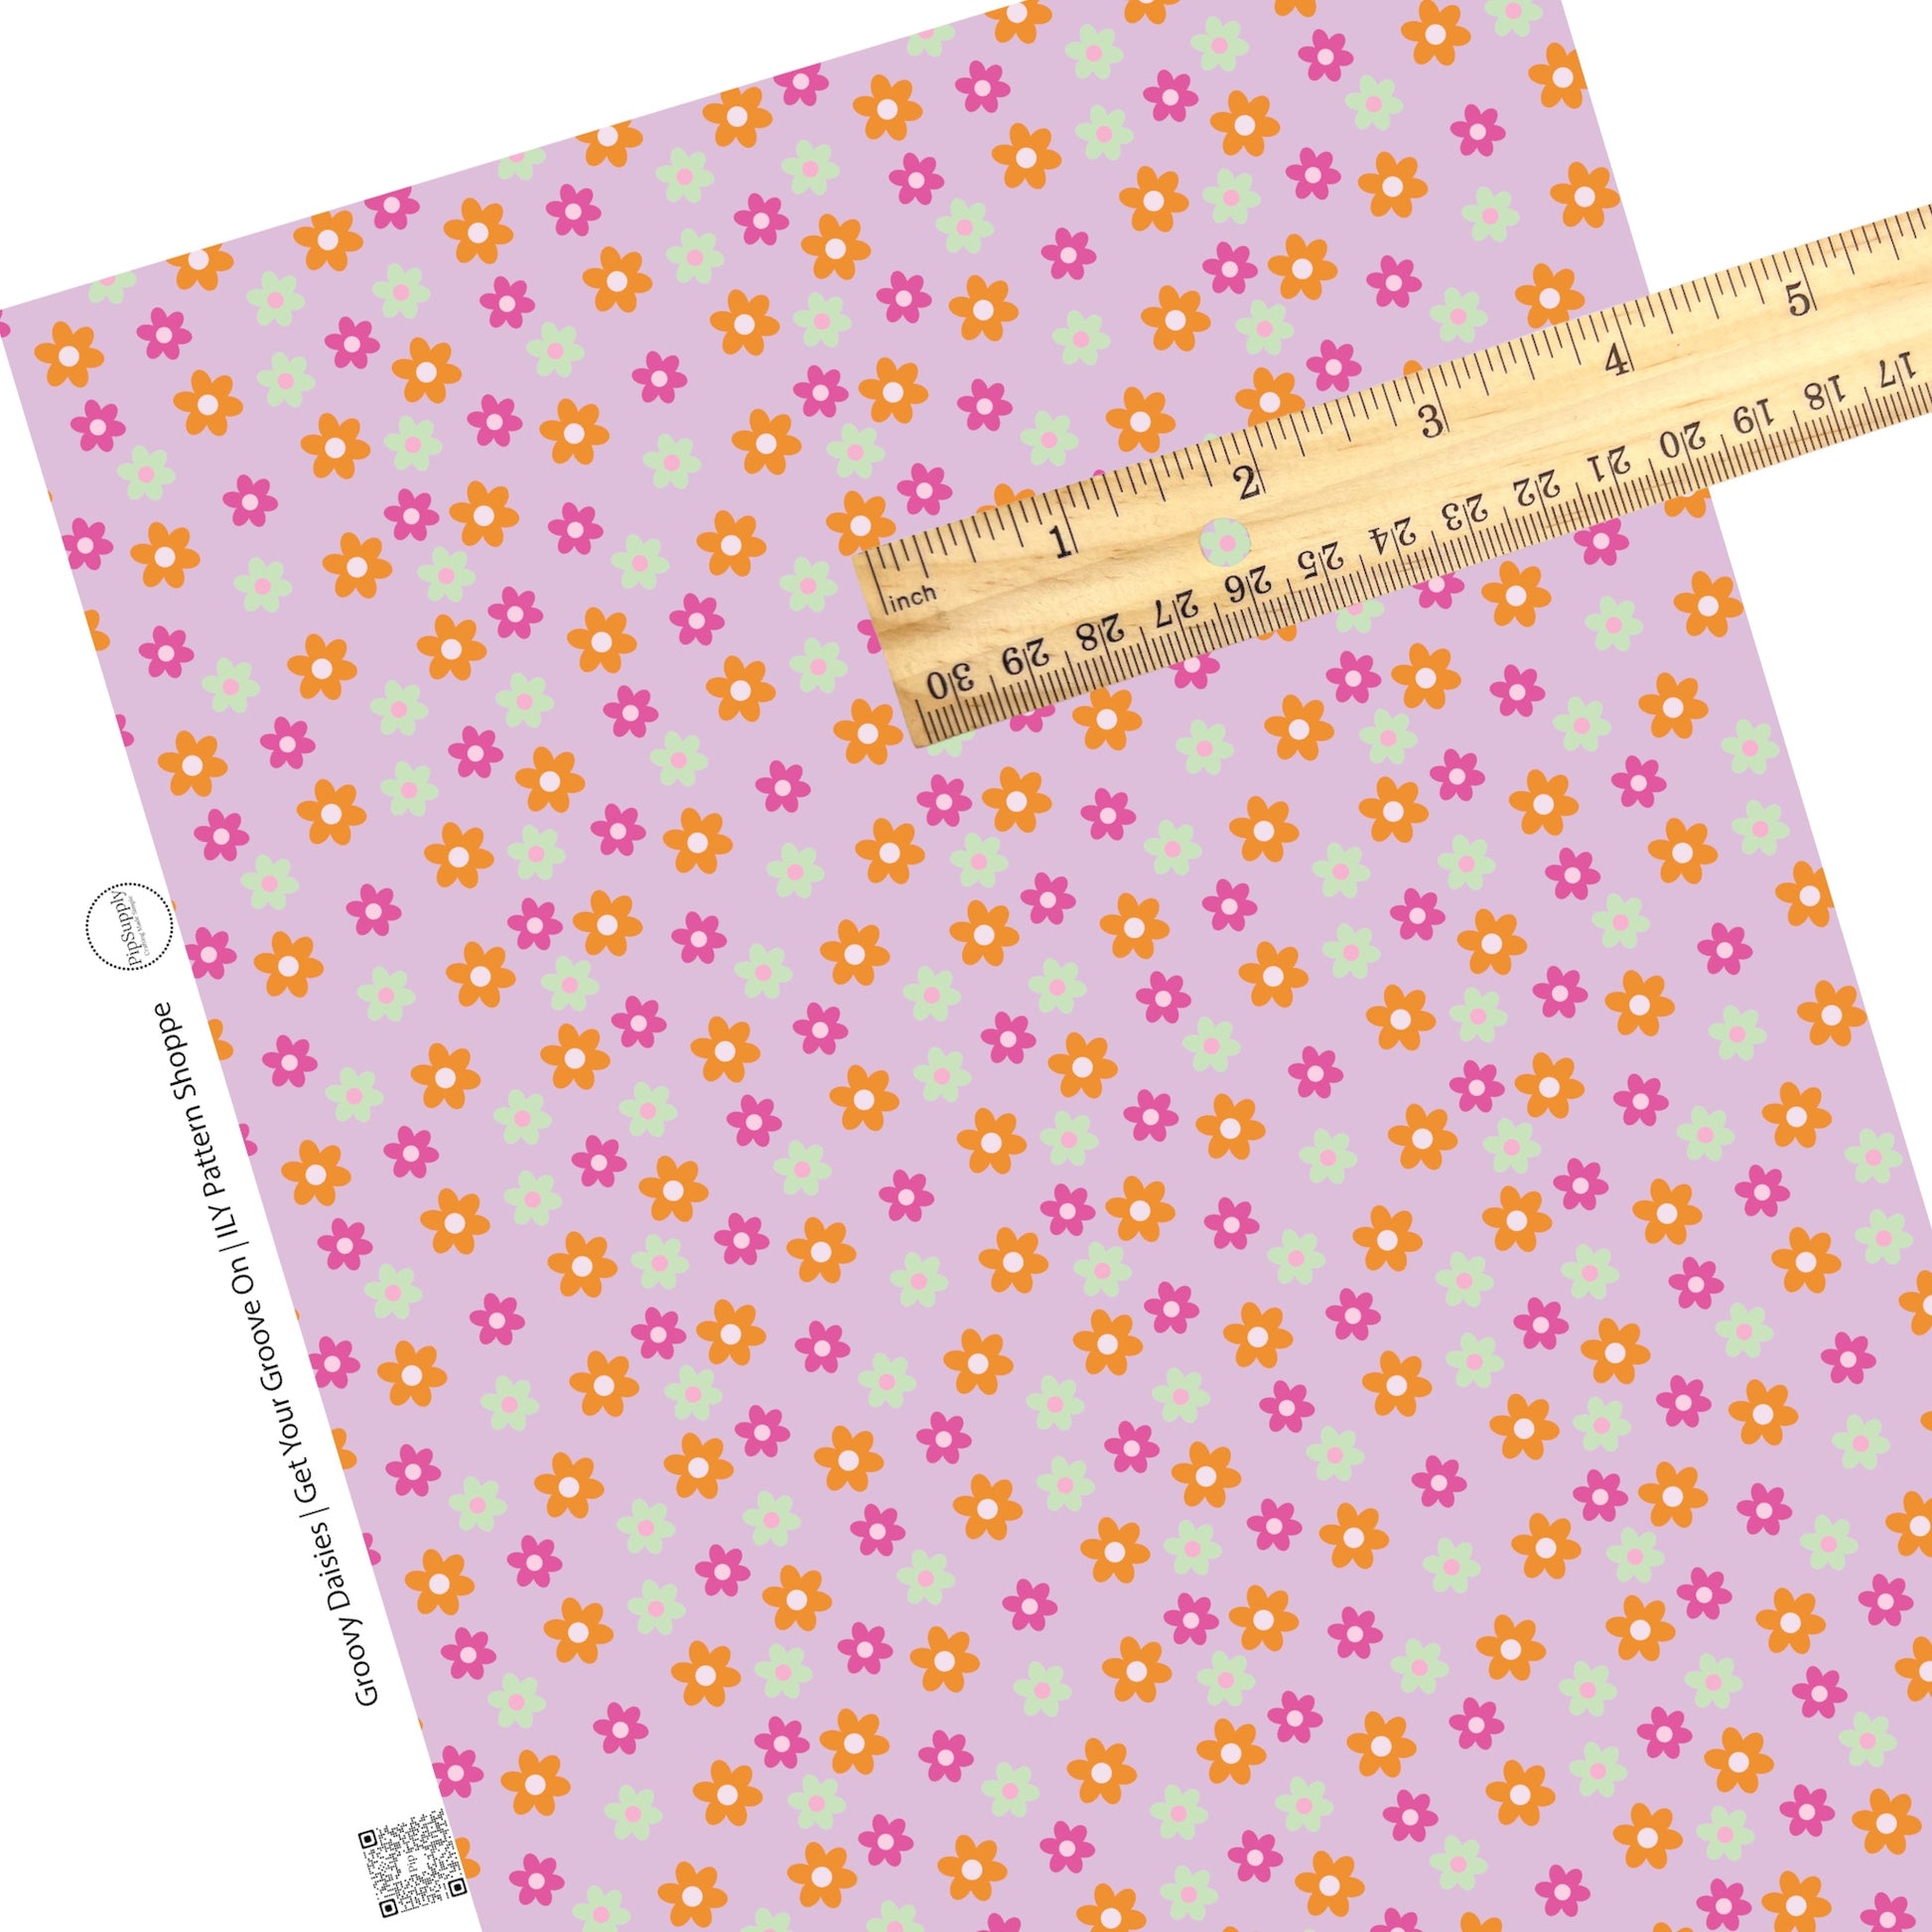 Pink, orange, and mint flowers with different shades of pink centers on a lavender faux leather sheet